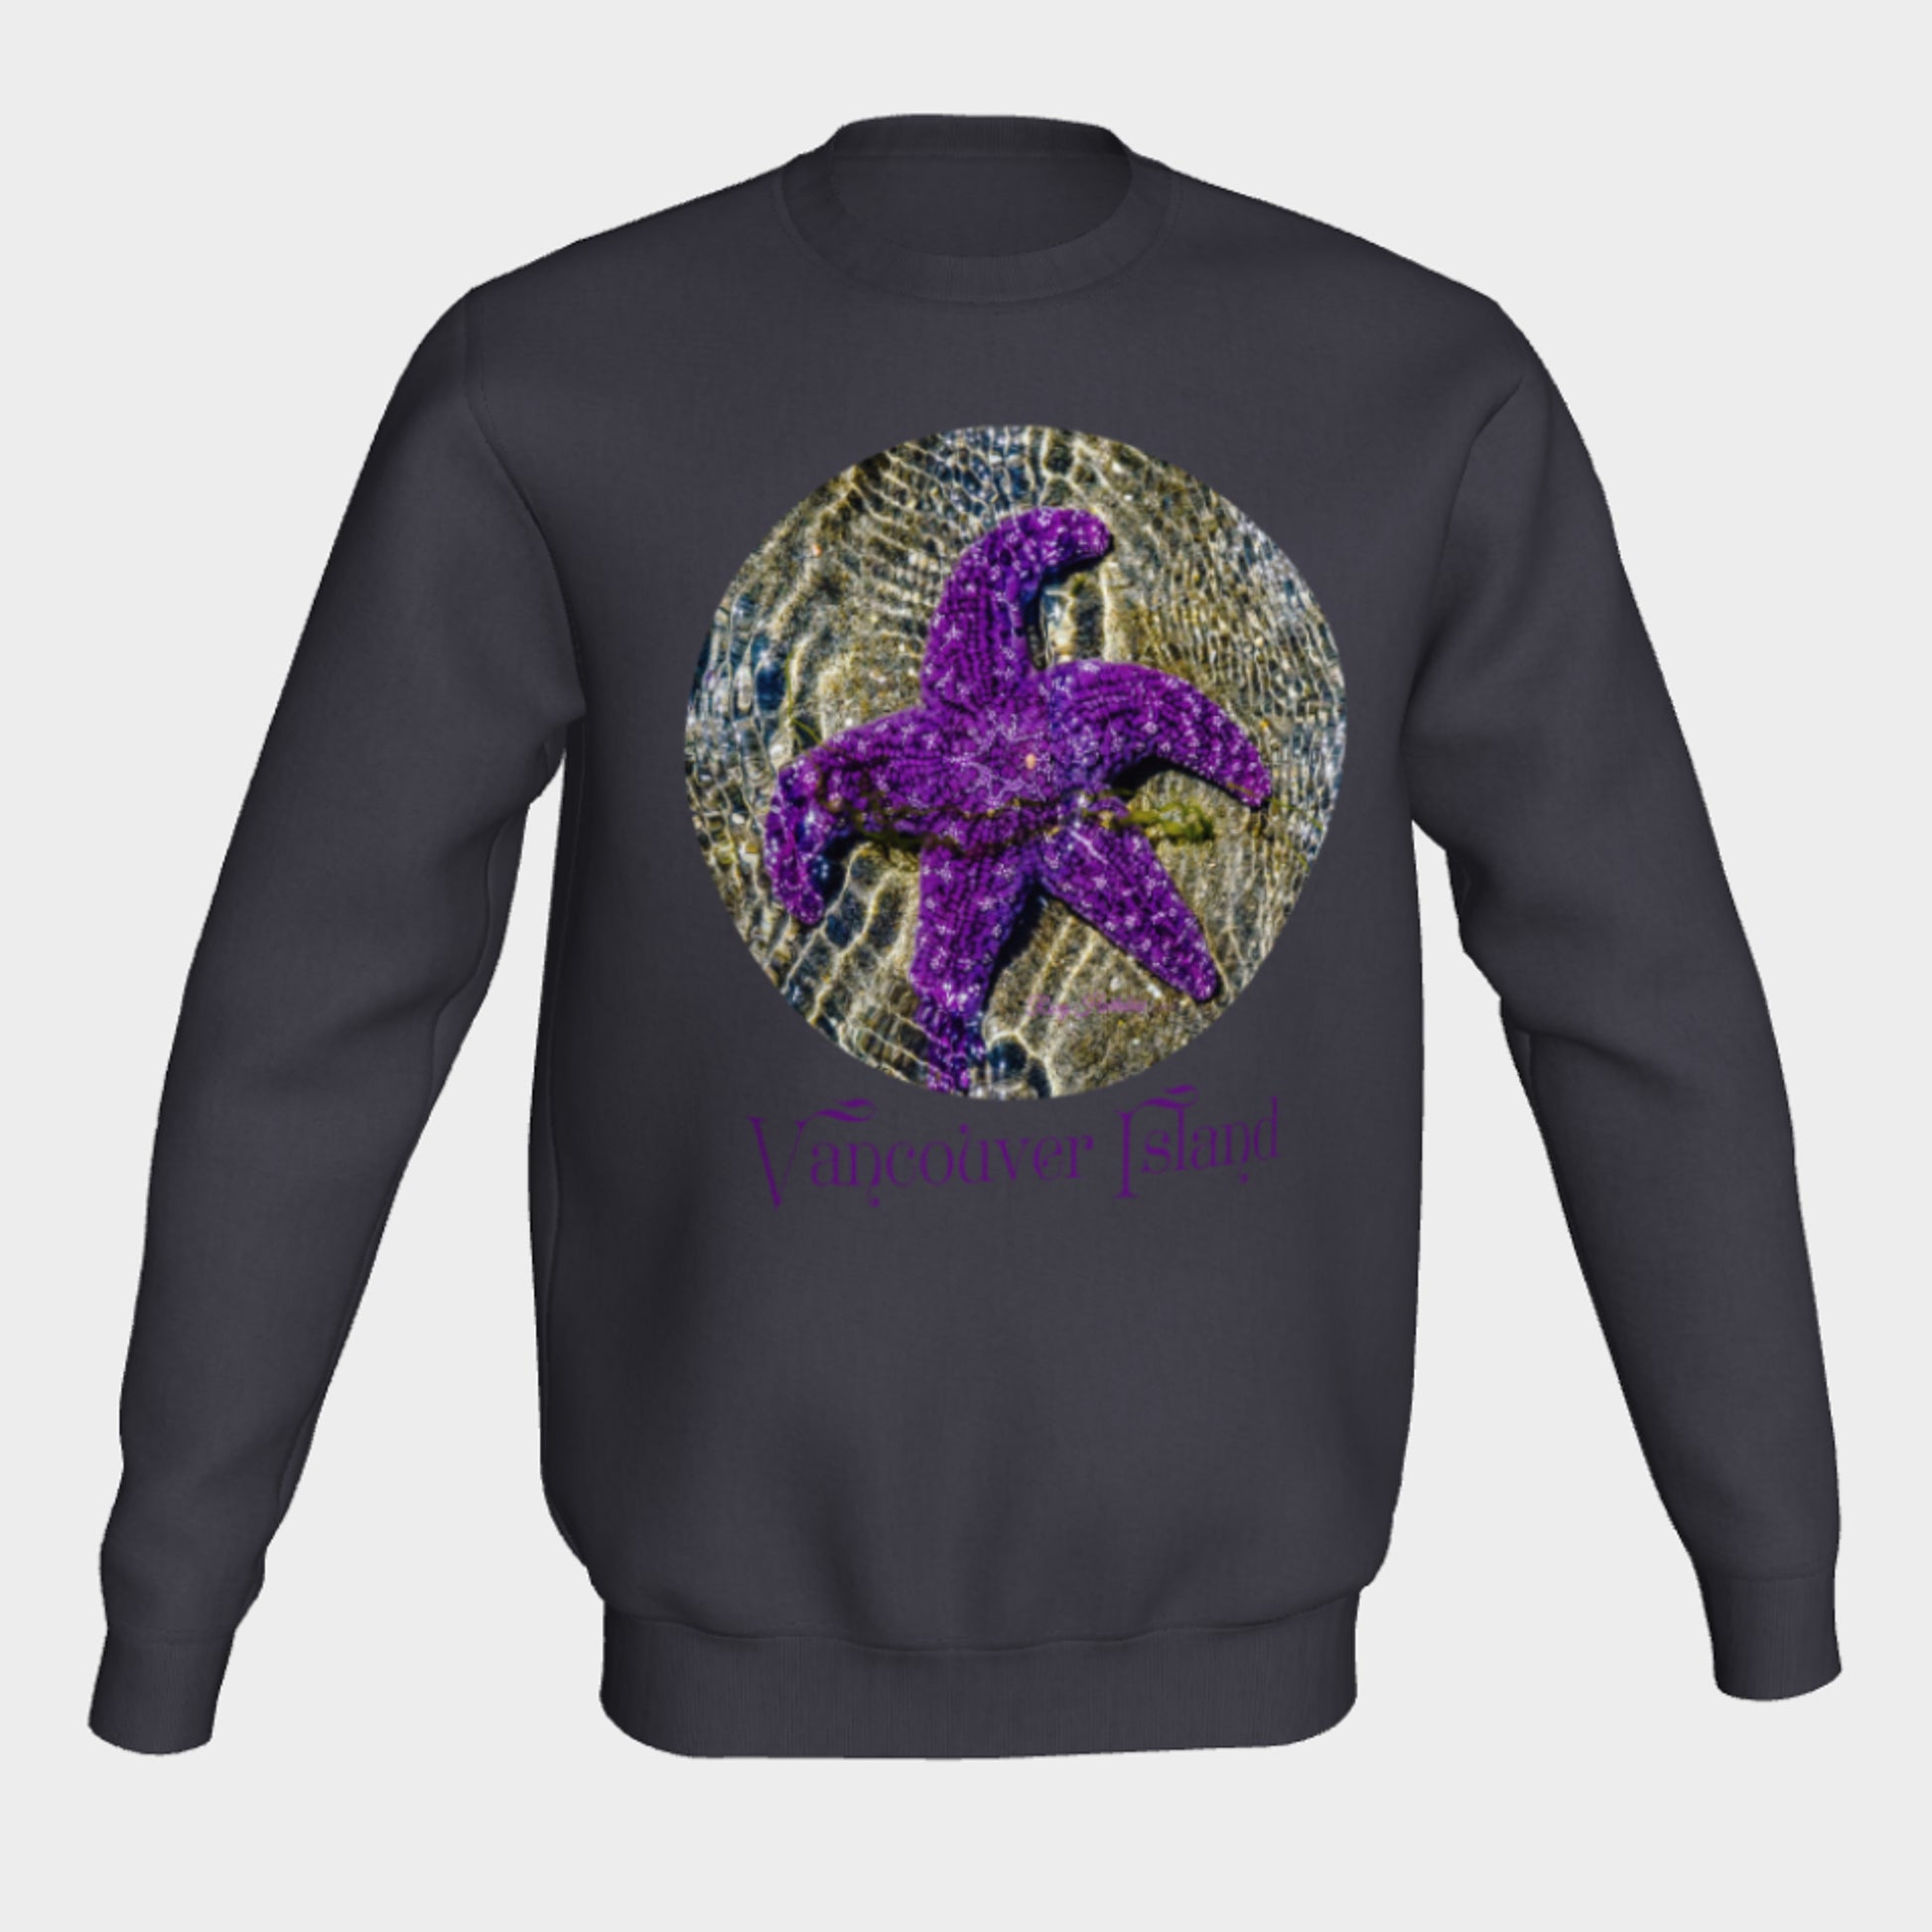 Last Day In May Starfish Vancouver Island Unisex Crewneck Sweatshirt What’s better than a super cozy sweatshirt? A super cozy sweatshirt from Van Isle Goddess!  Super cozy unisex sweatshirt for those chilly days.  Excellent for men or women.   Fit is roomy and comfortable. 